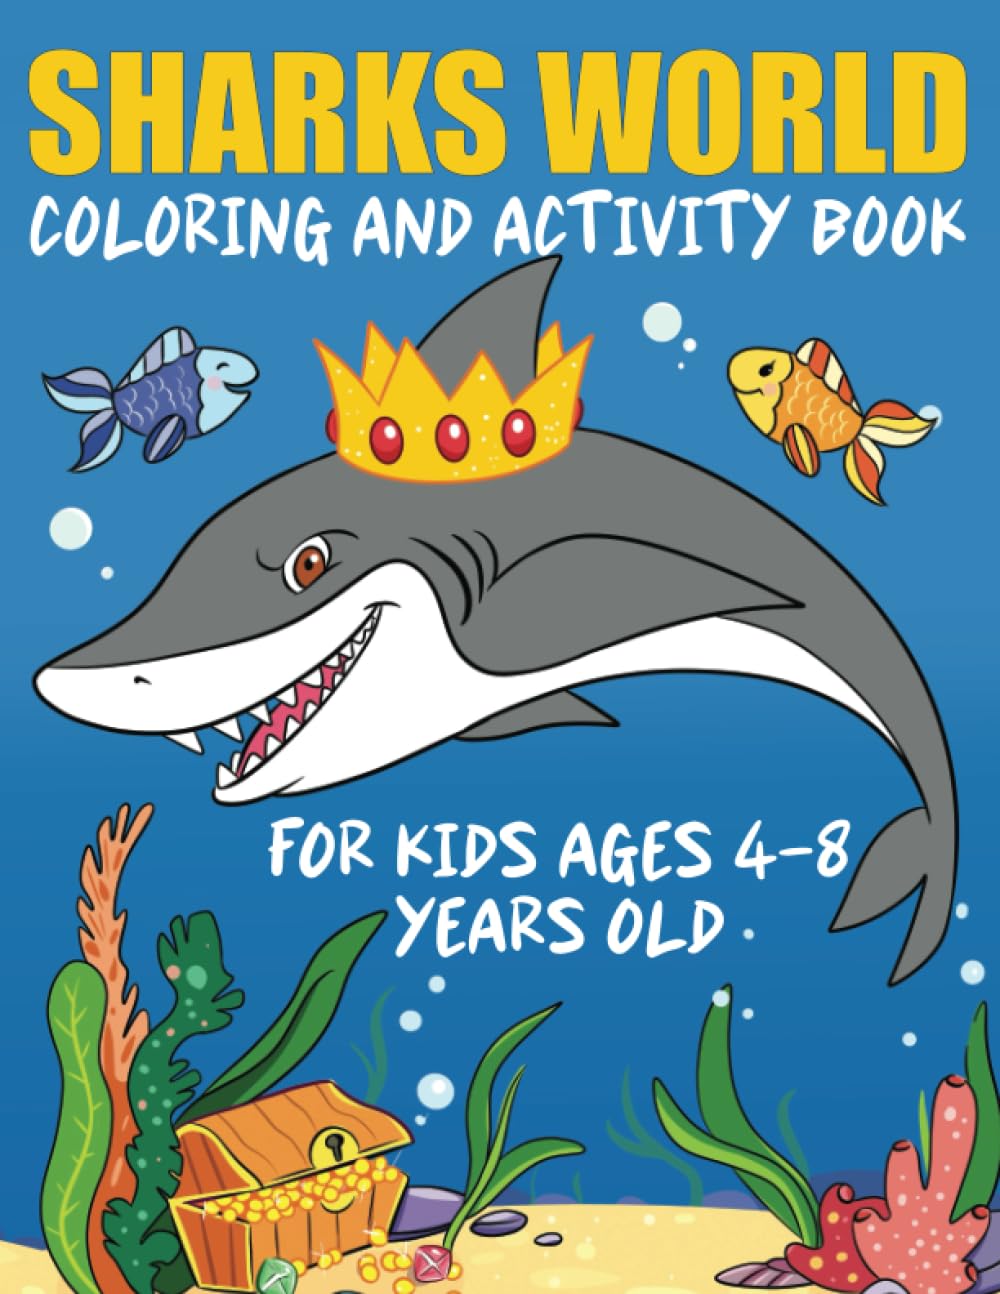 Sharks world coloring and activity book